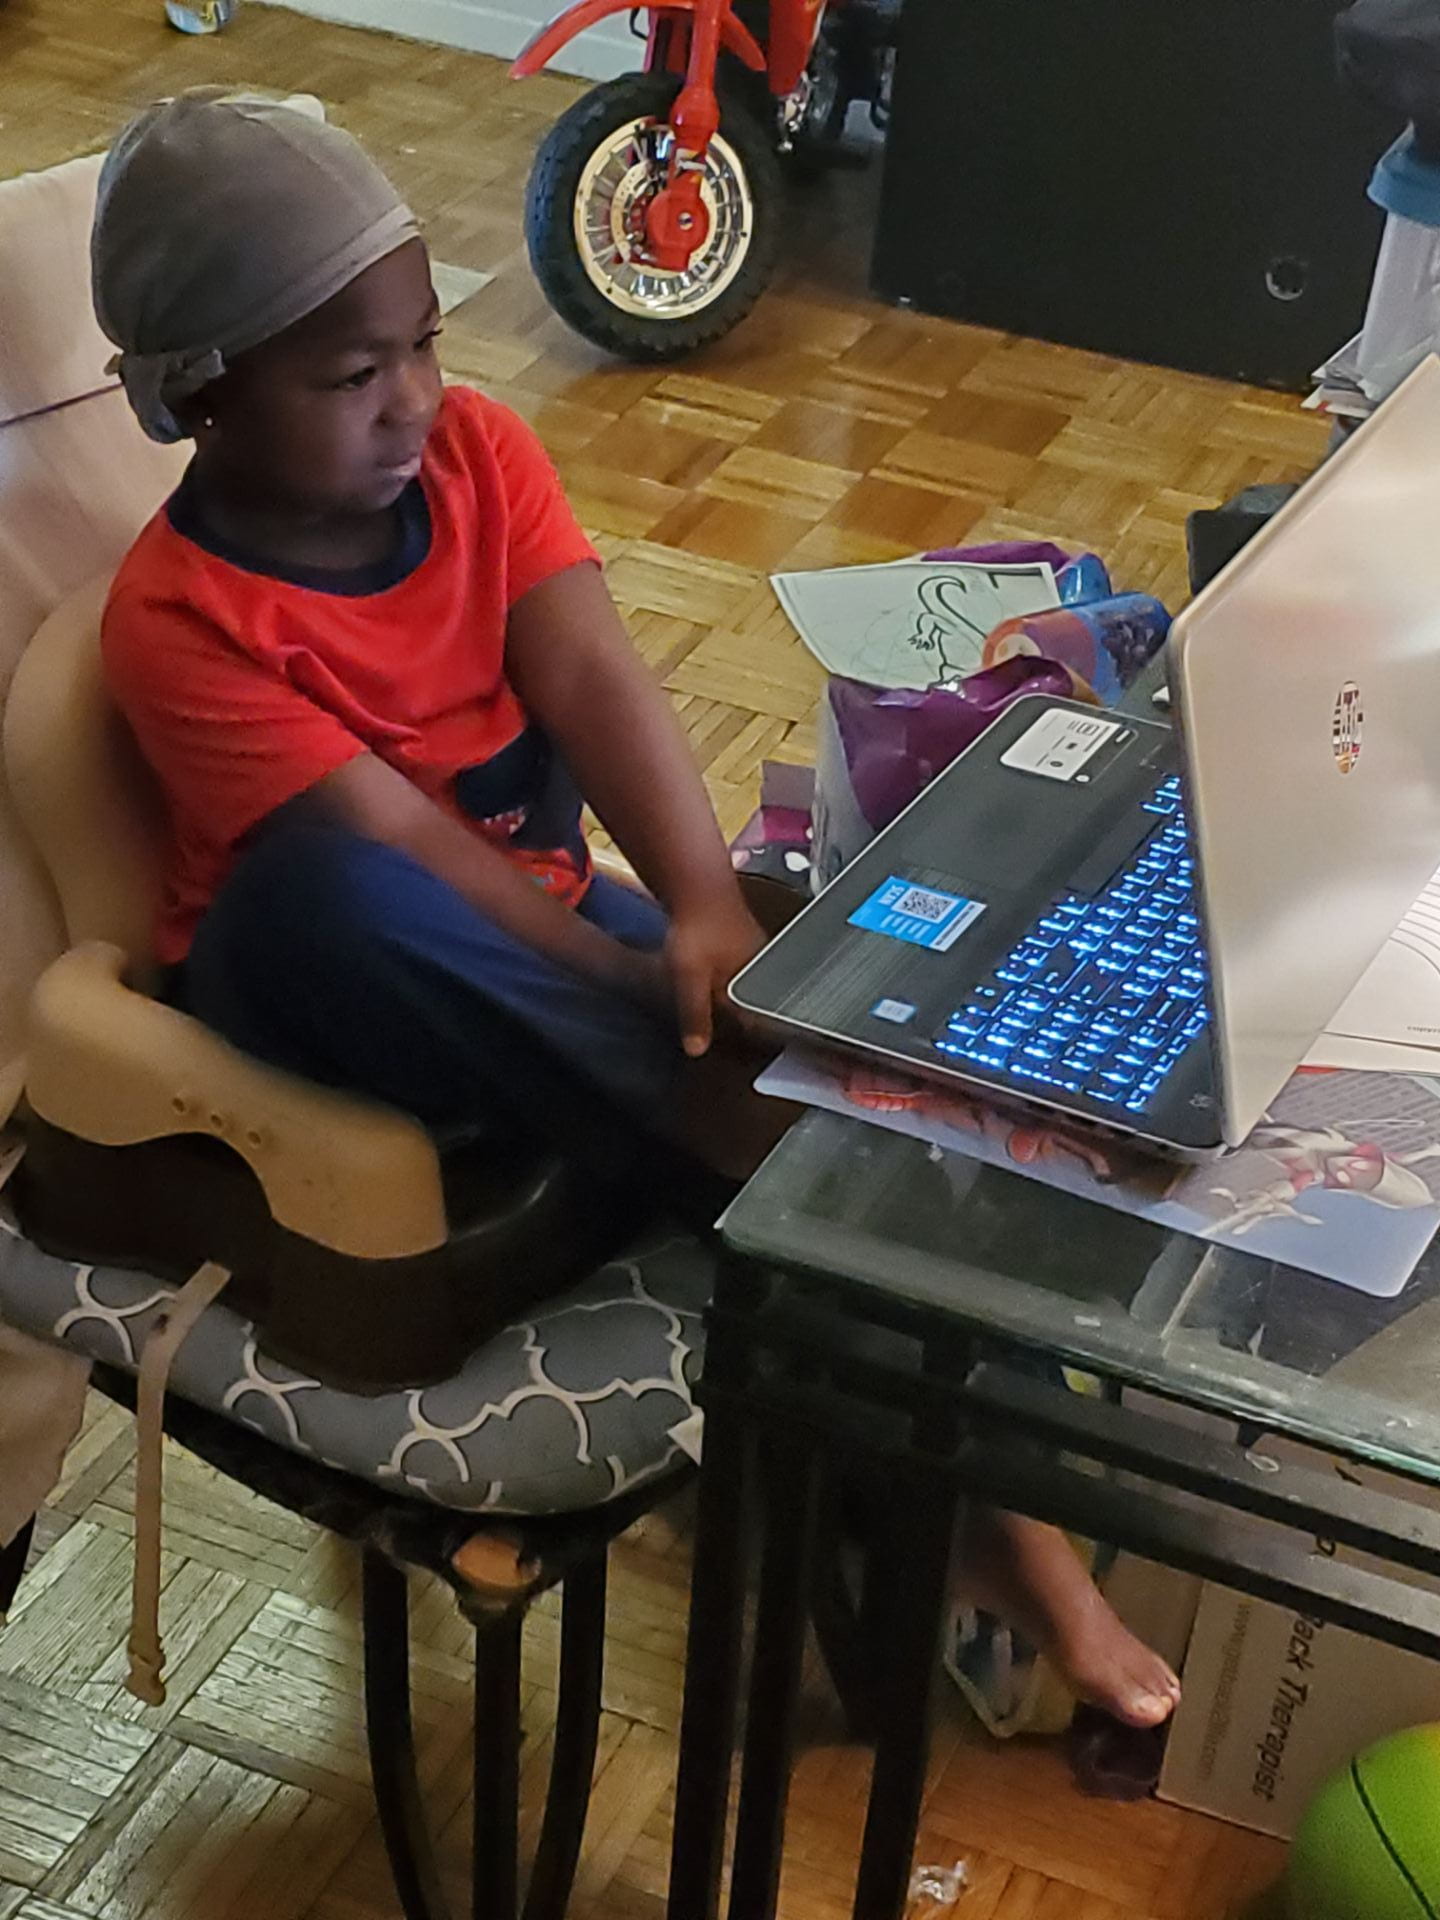 child sitting on a chair looking at a laptop